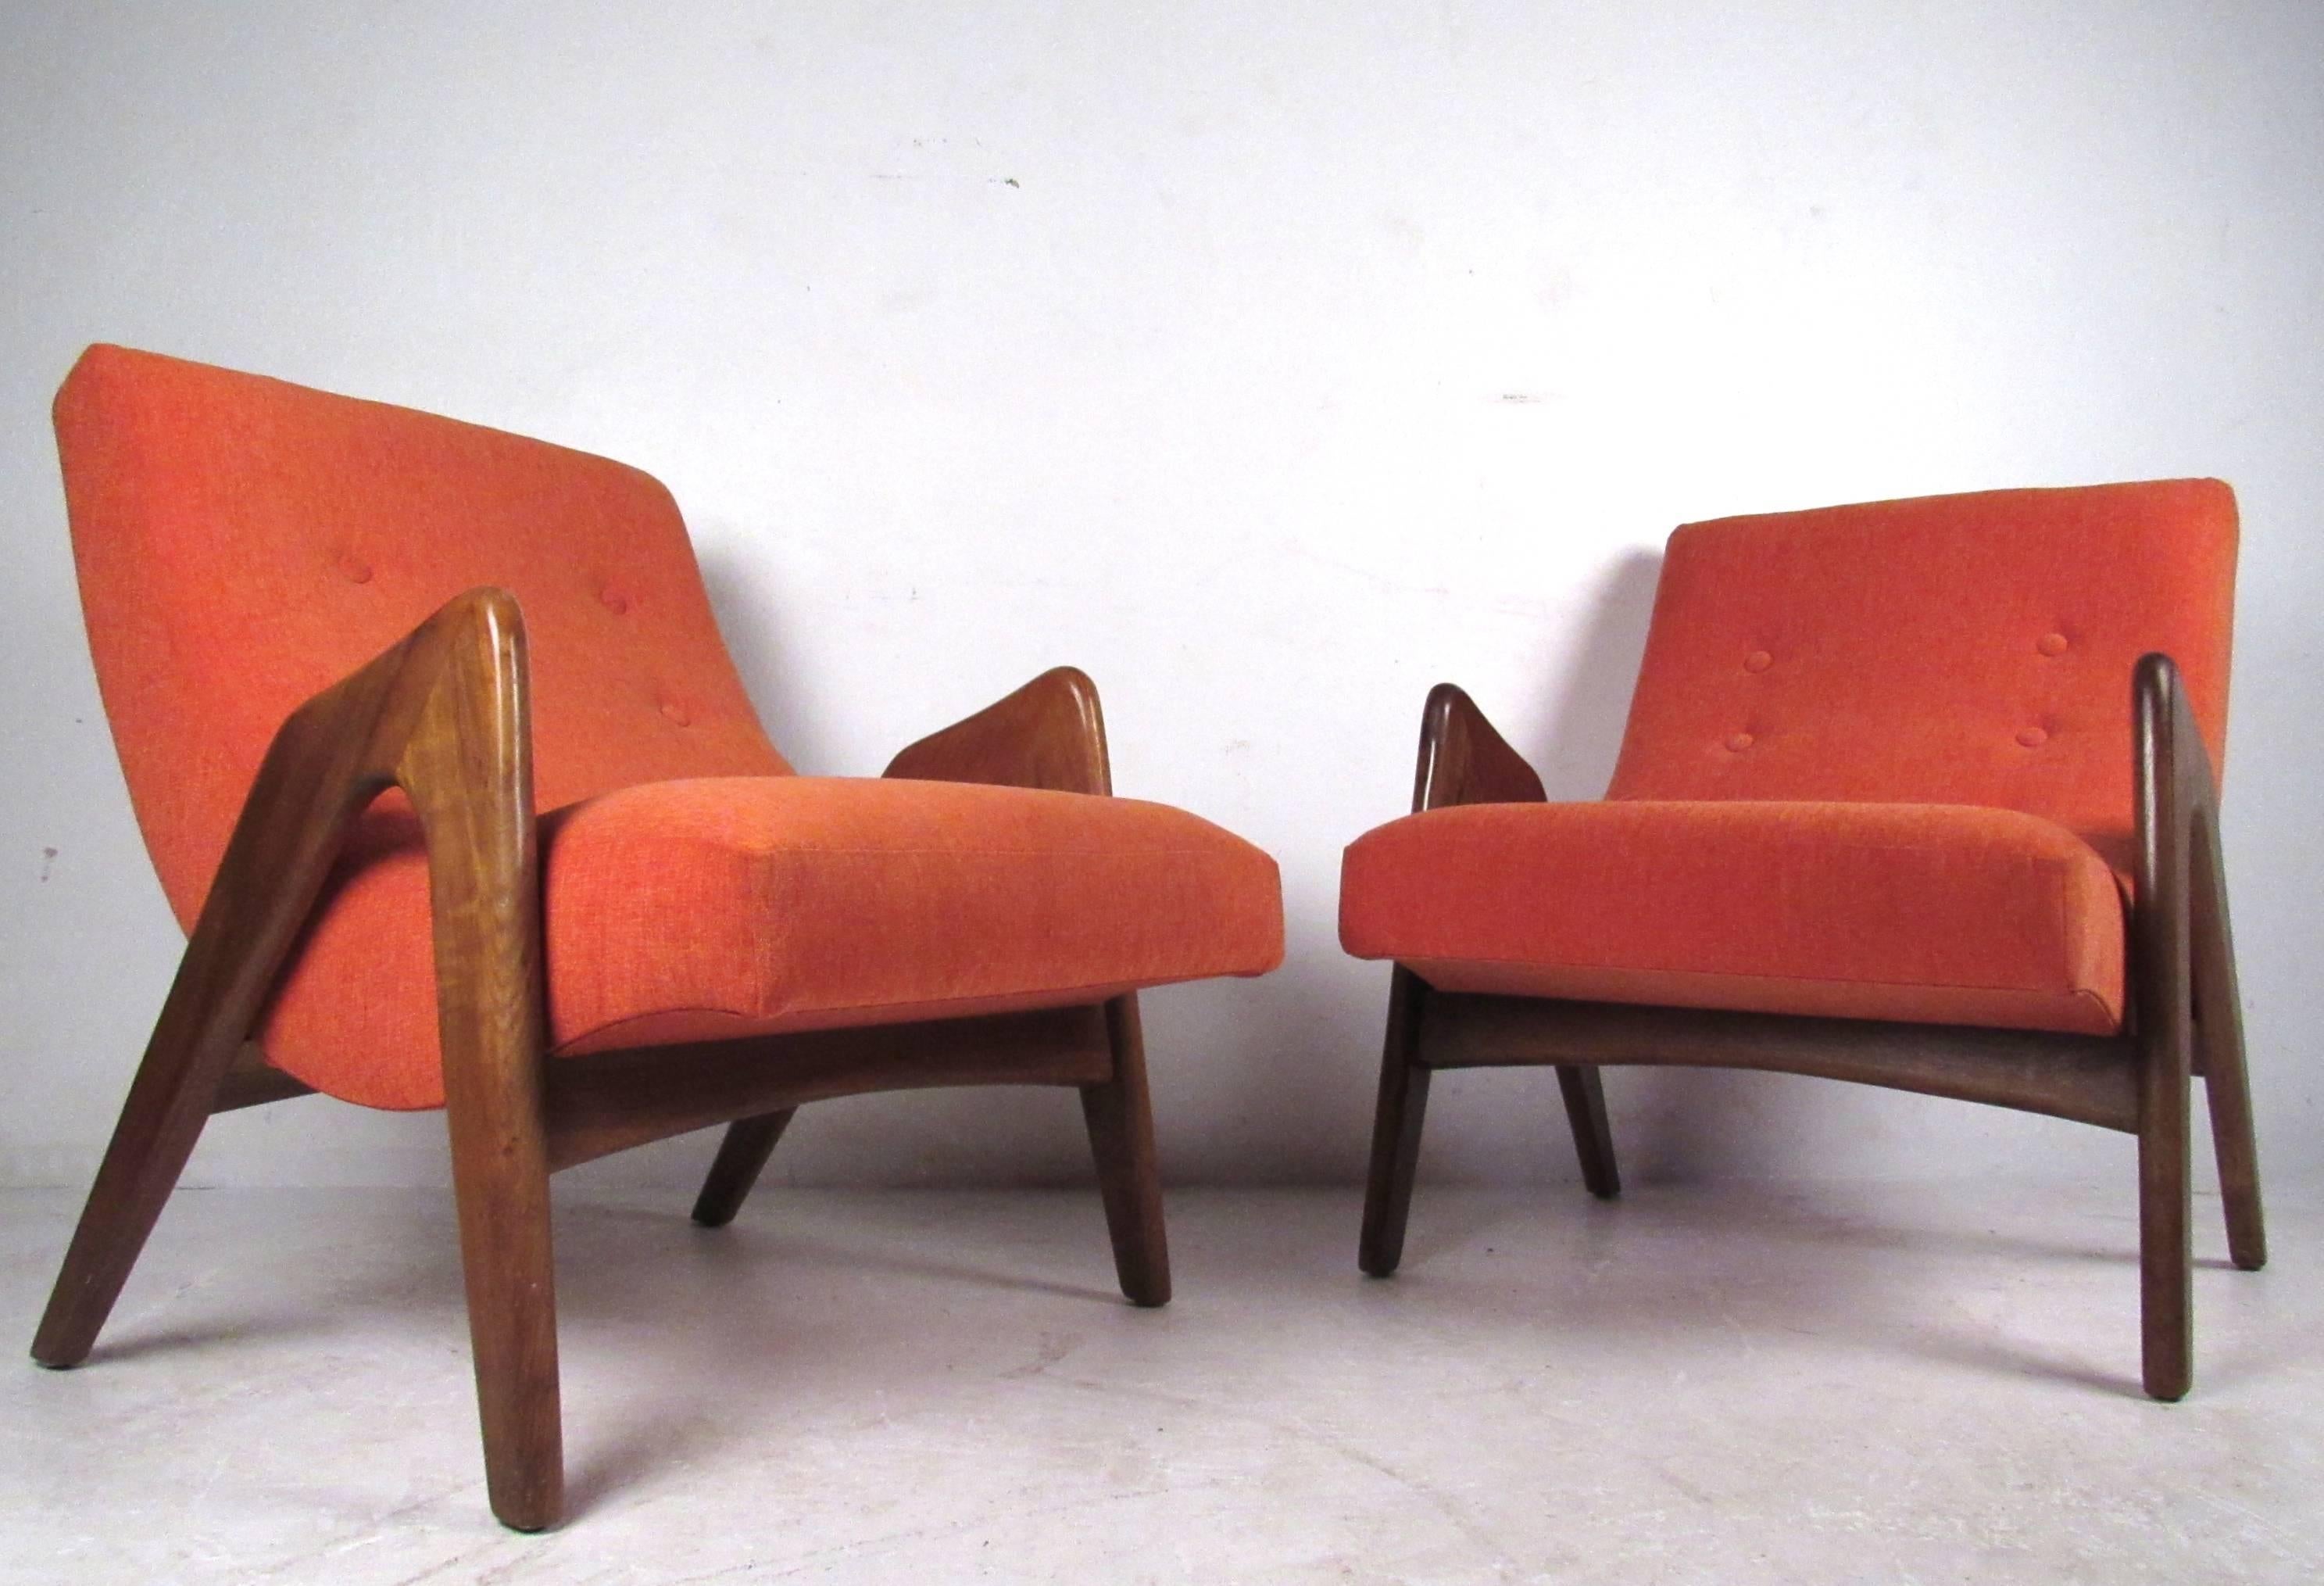 American Mid-Century Modern Adrian Pearsall Lounge Chairs